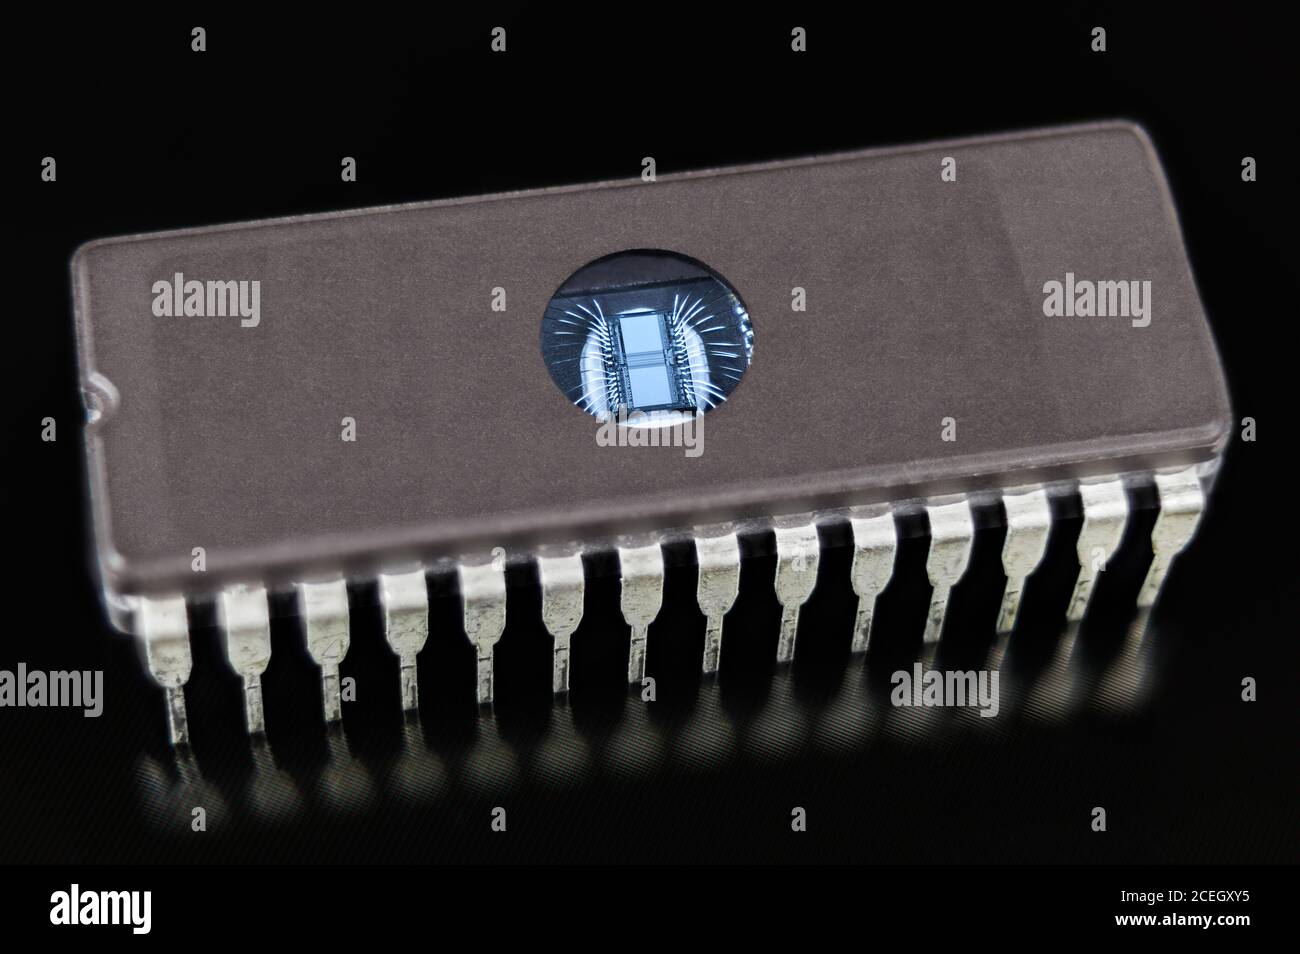 Erasable programmable read-only memory. Digital integrated circuit die with thin silver wires. DIP package with transparent window to UV erase of data. Stock Photo